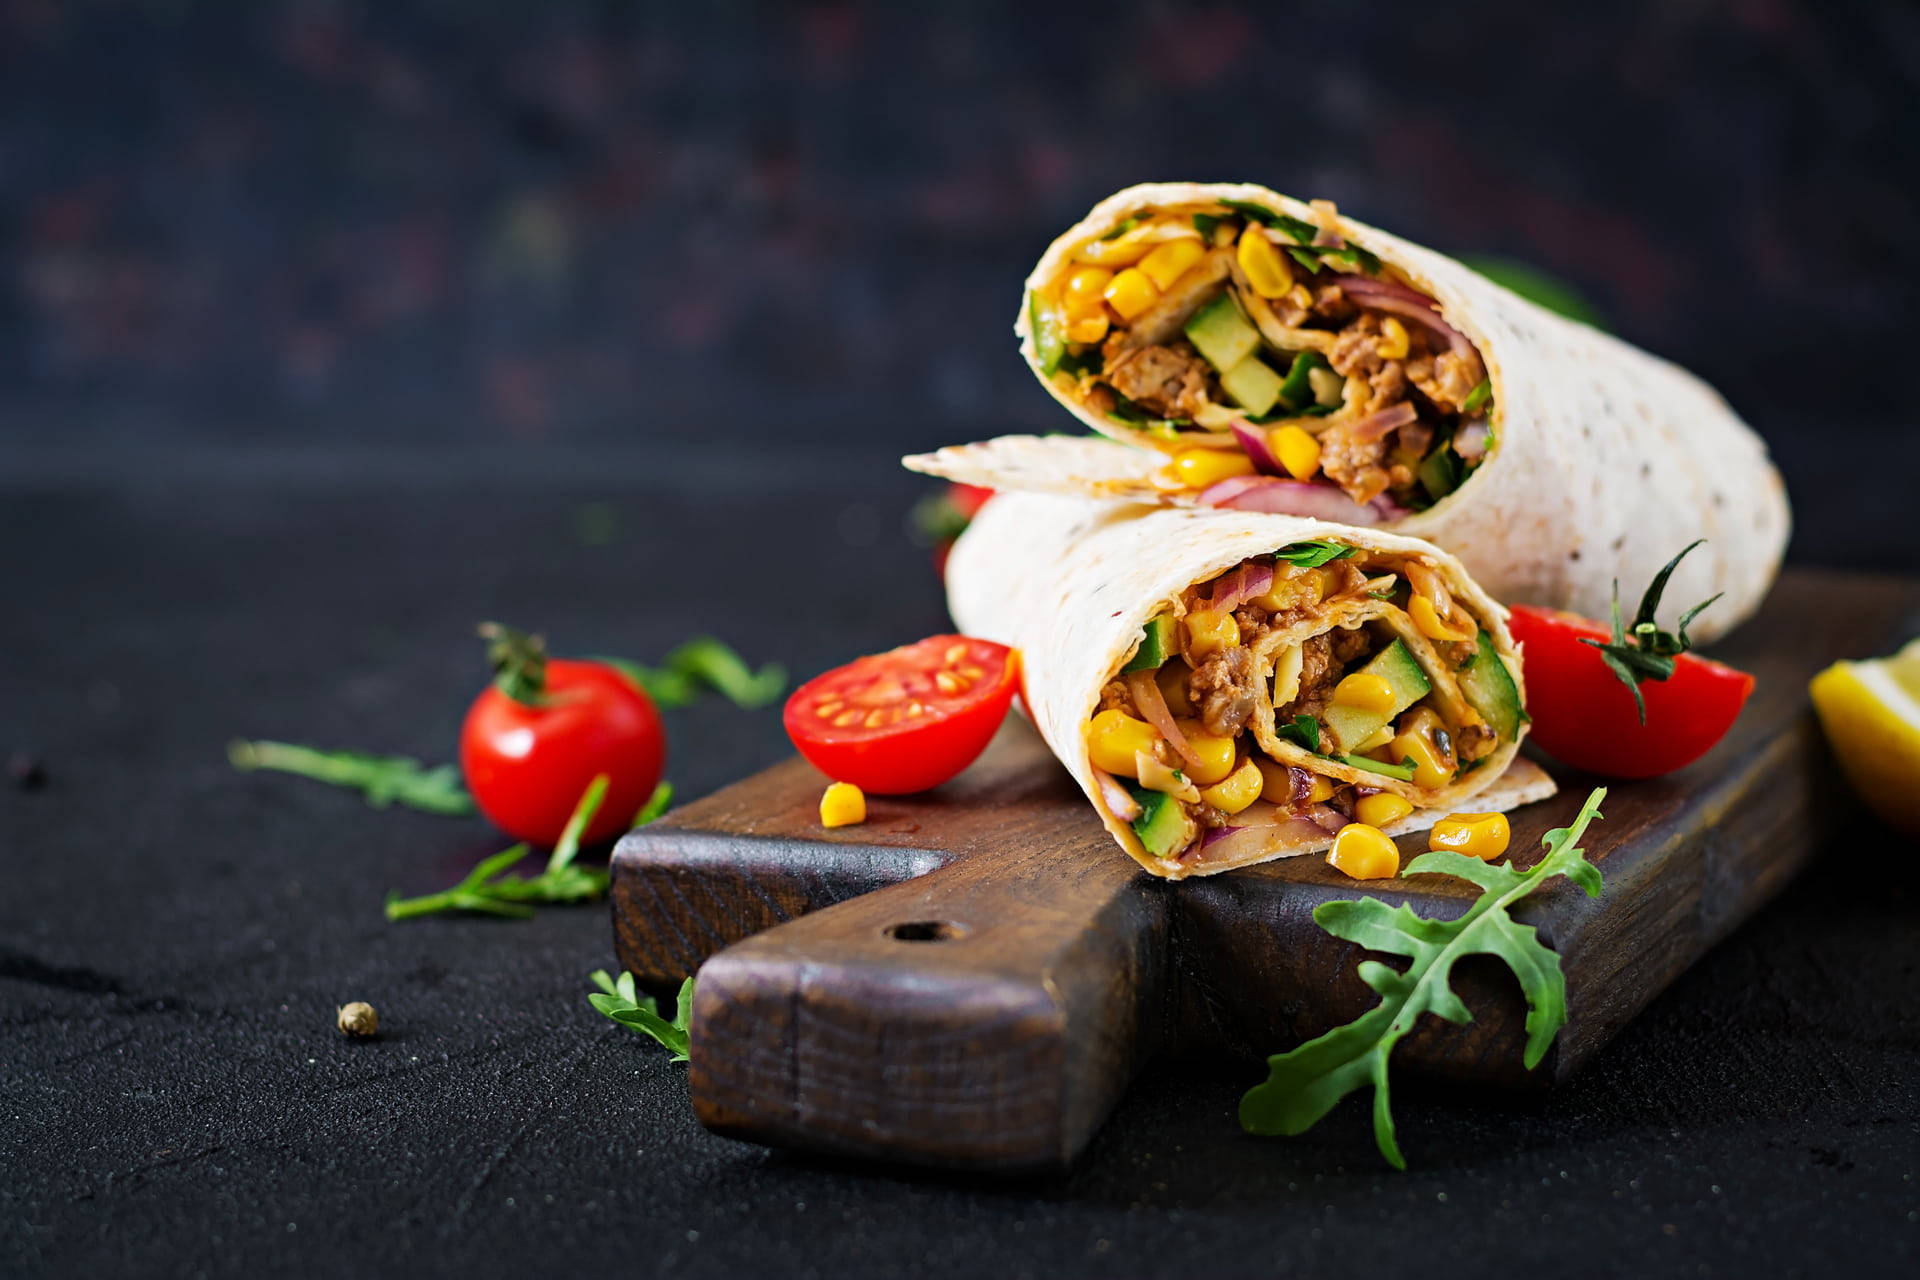 Caption: Savory Beef and Vegetable Burrito Wallpaper